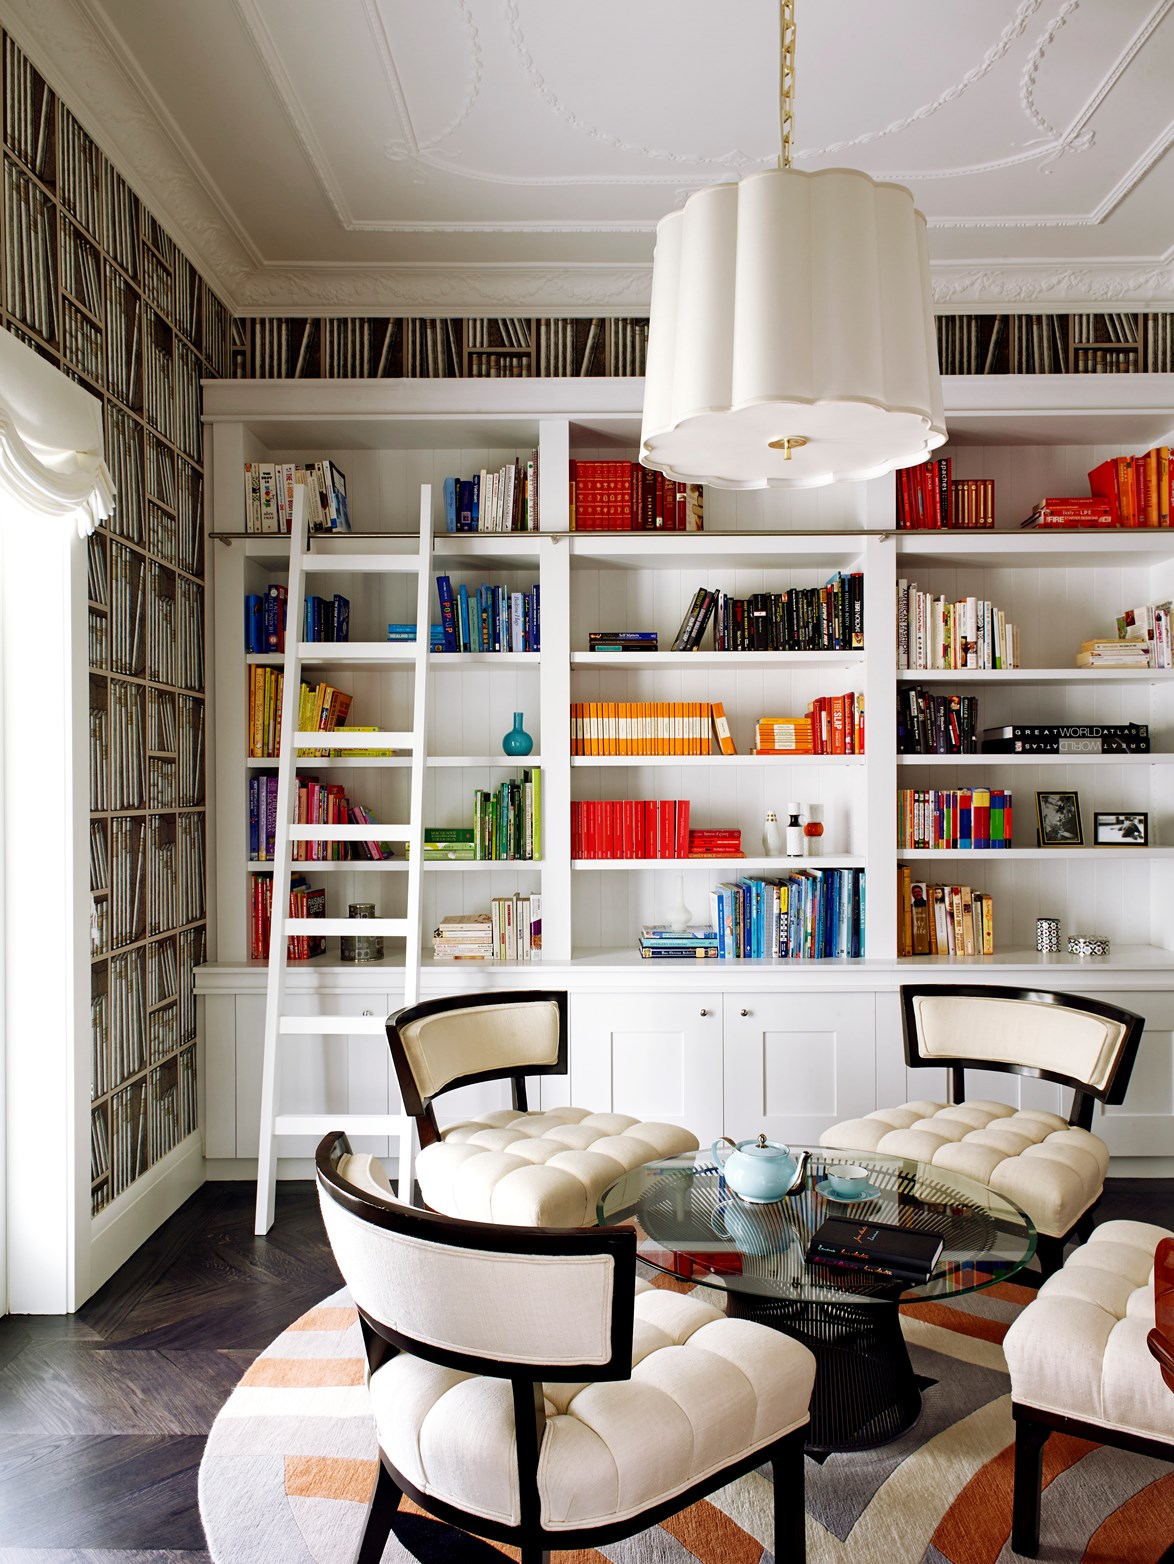 [Bookshelves](https://www.homestolove.com.au/10-bookshelves-in-australian-homes-5497|target="_blank") can be a common clutter culprit but not this beauty! Try colour-coding your books to make them a design feature rather than an eyesore.